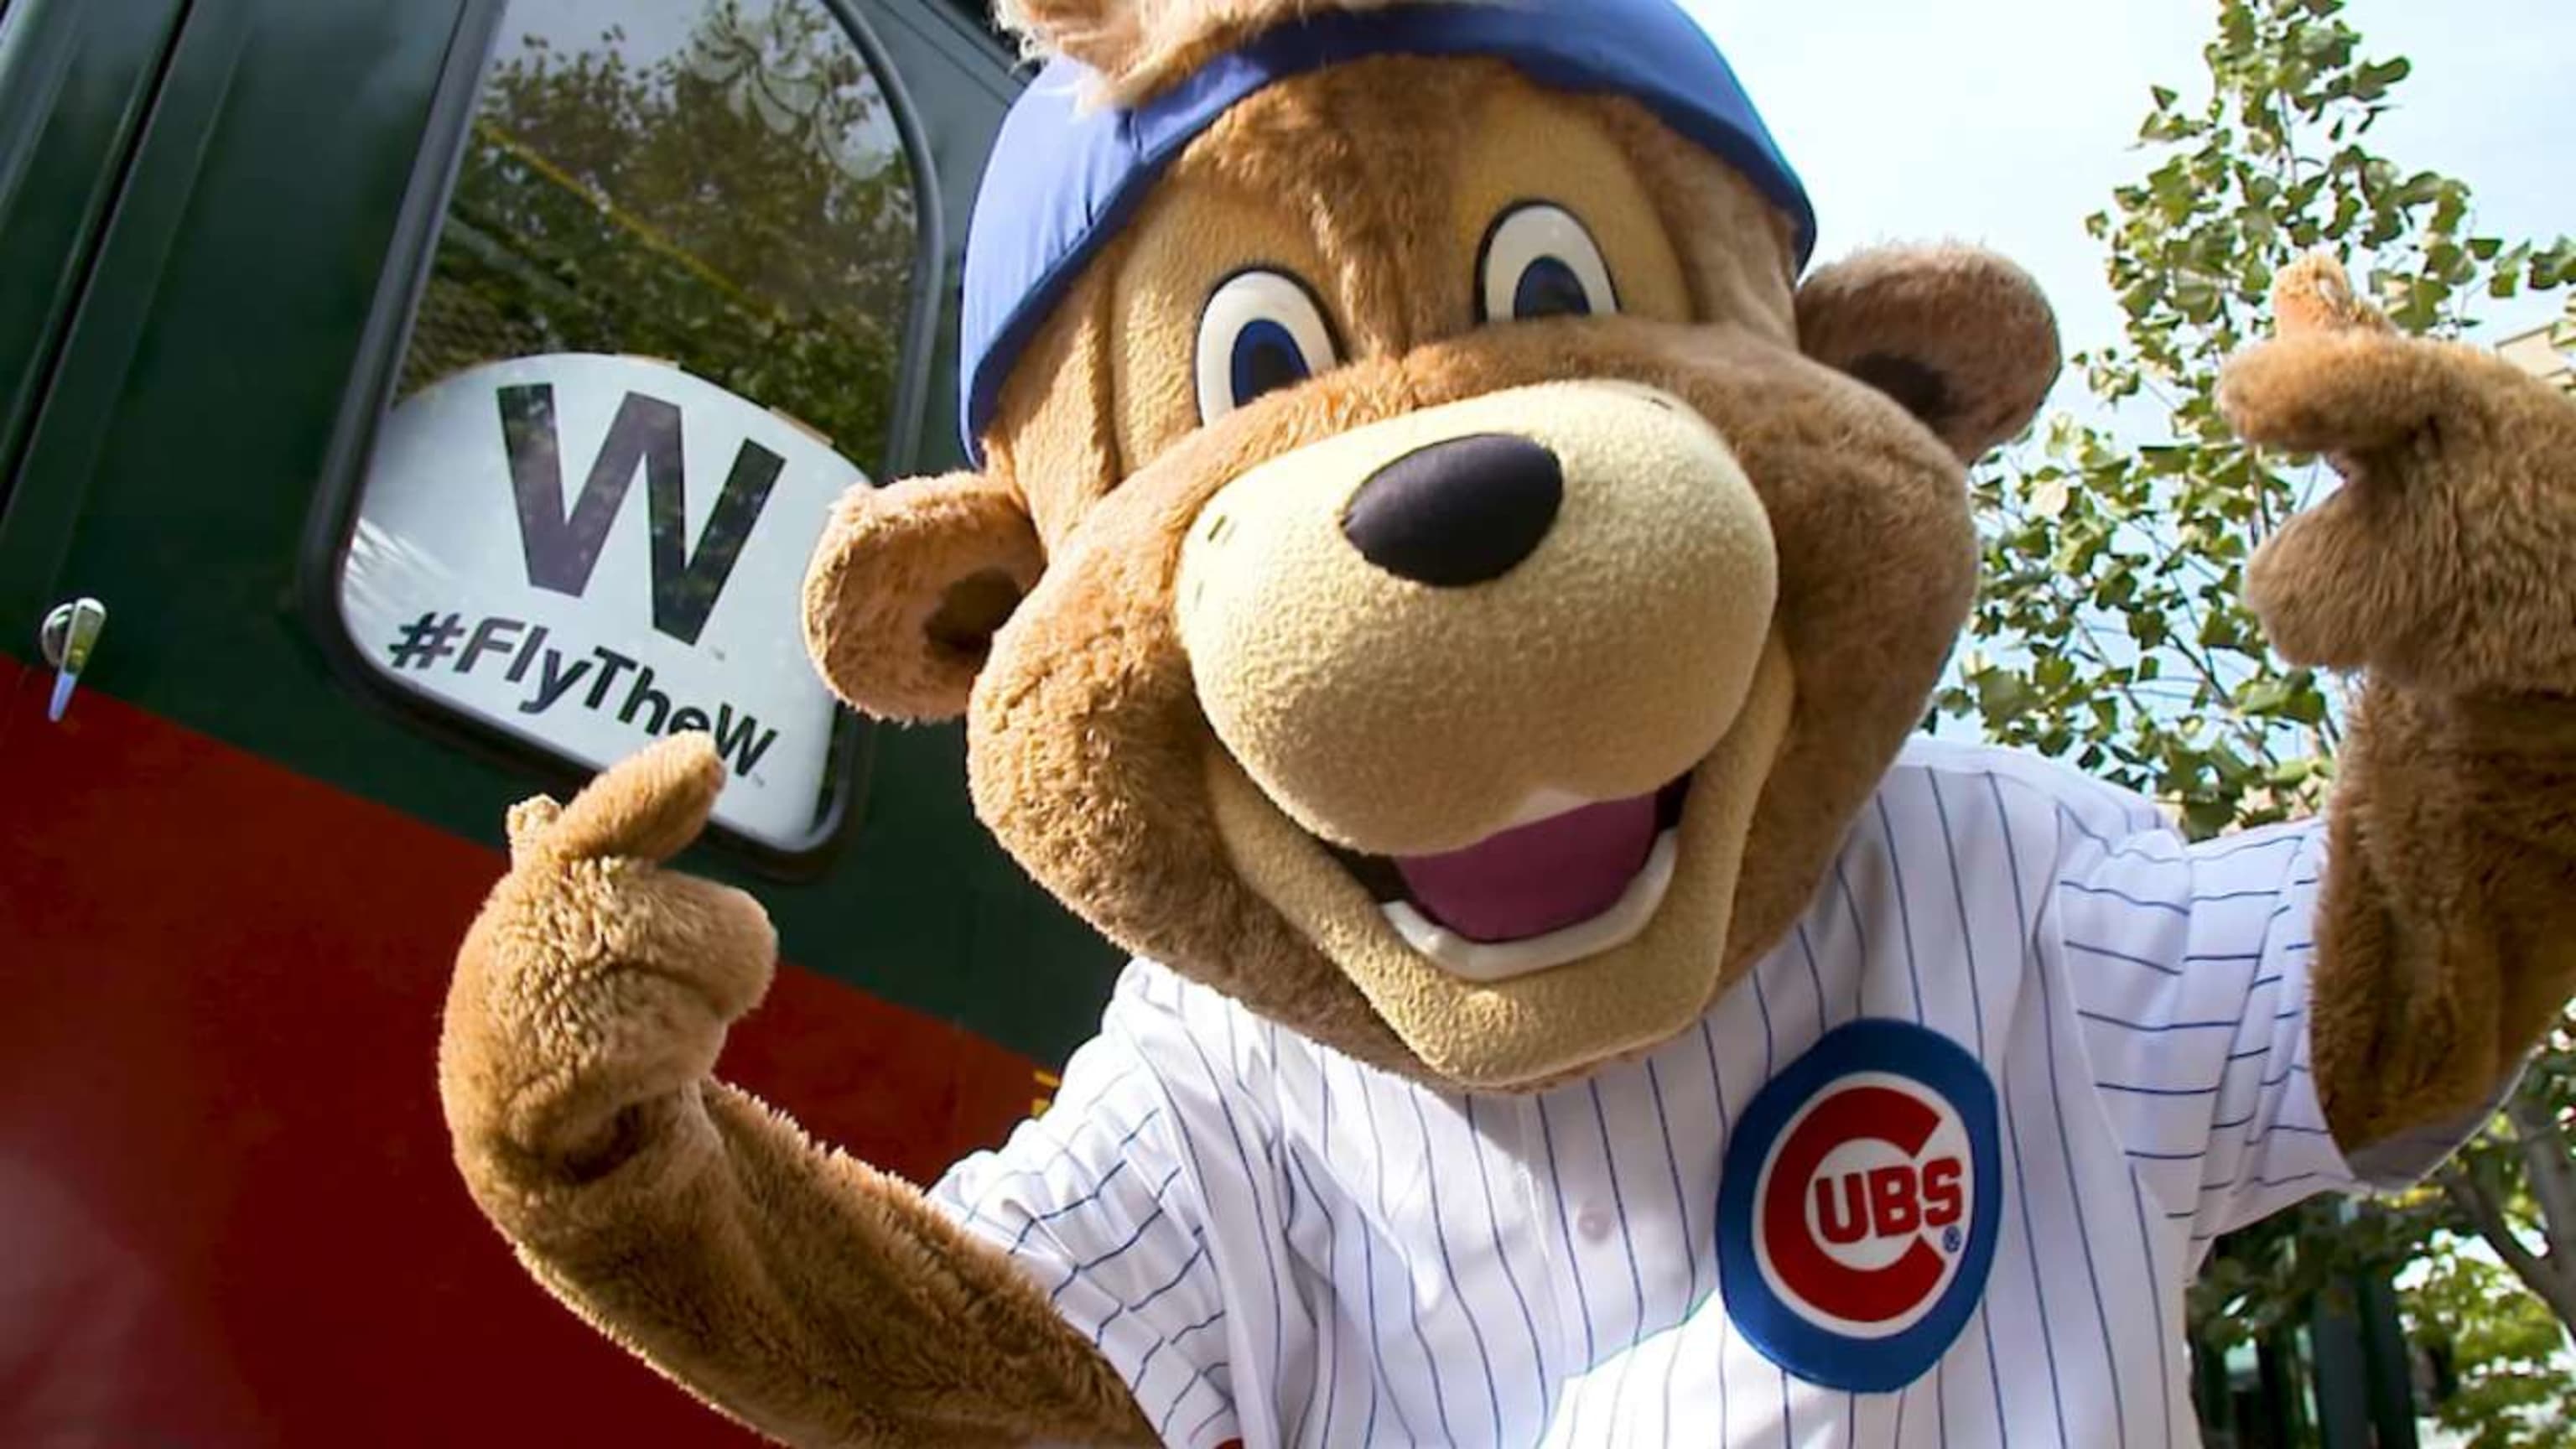 Chicago Cubs - Sound off! What is your favorite Cubs